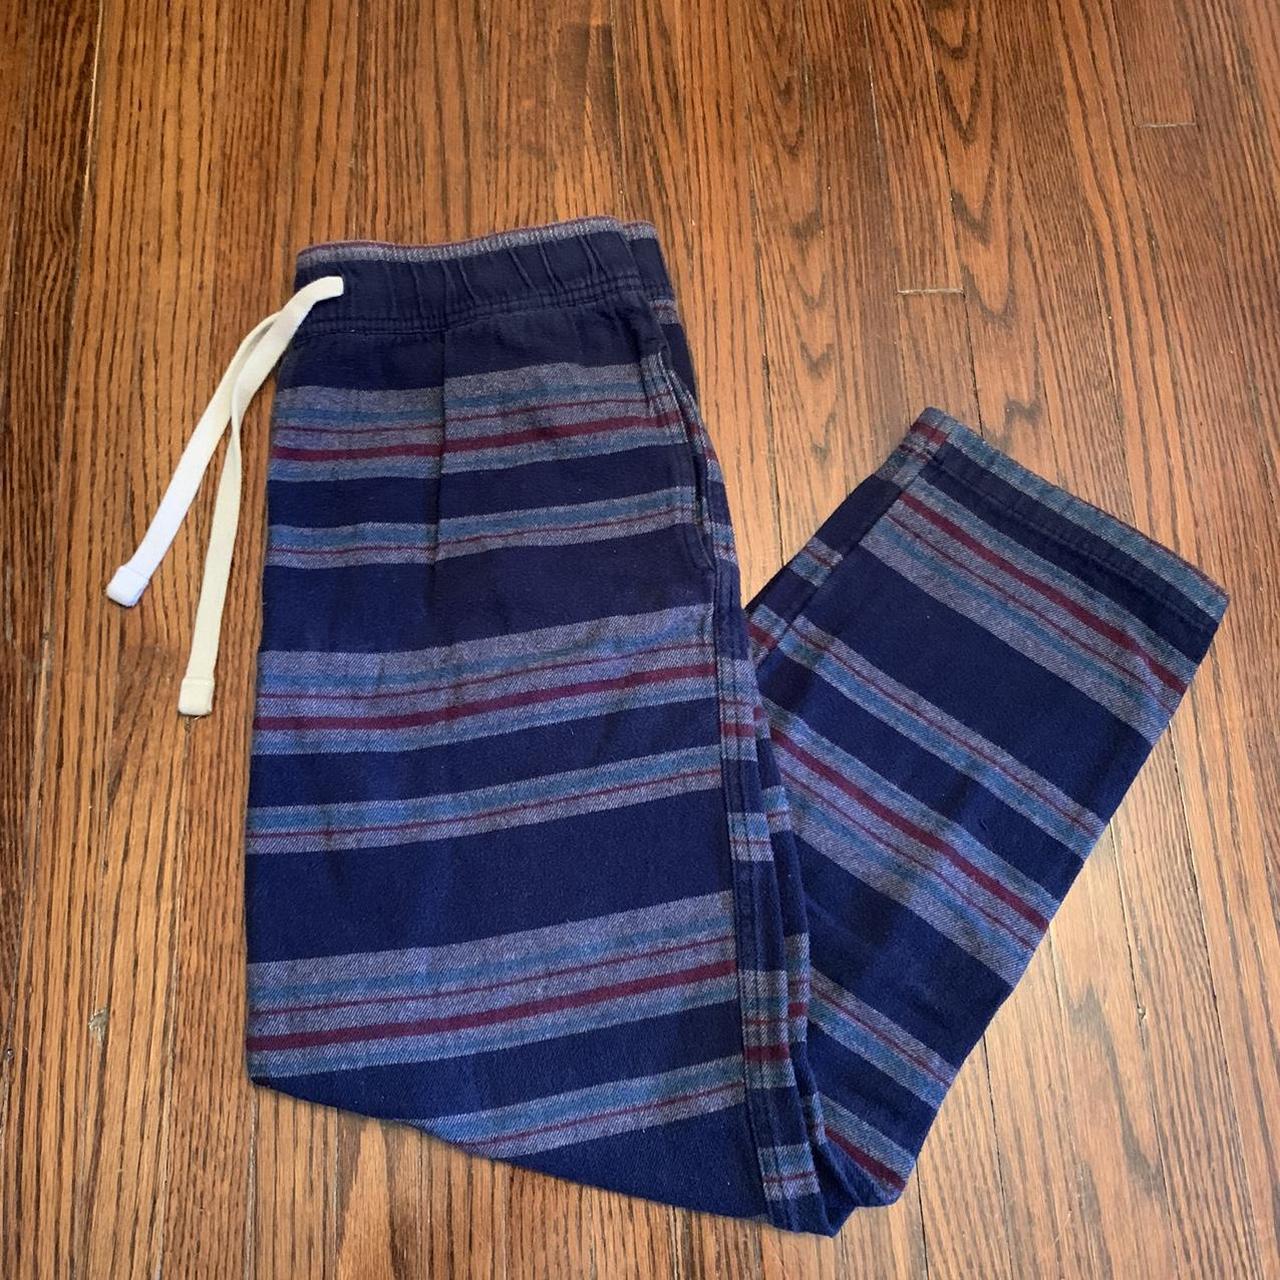 Hollister striped pants, size small. Good condition, - Depop